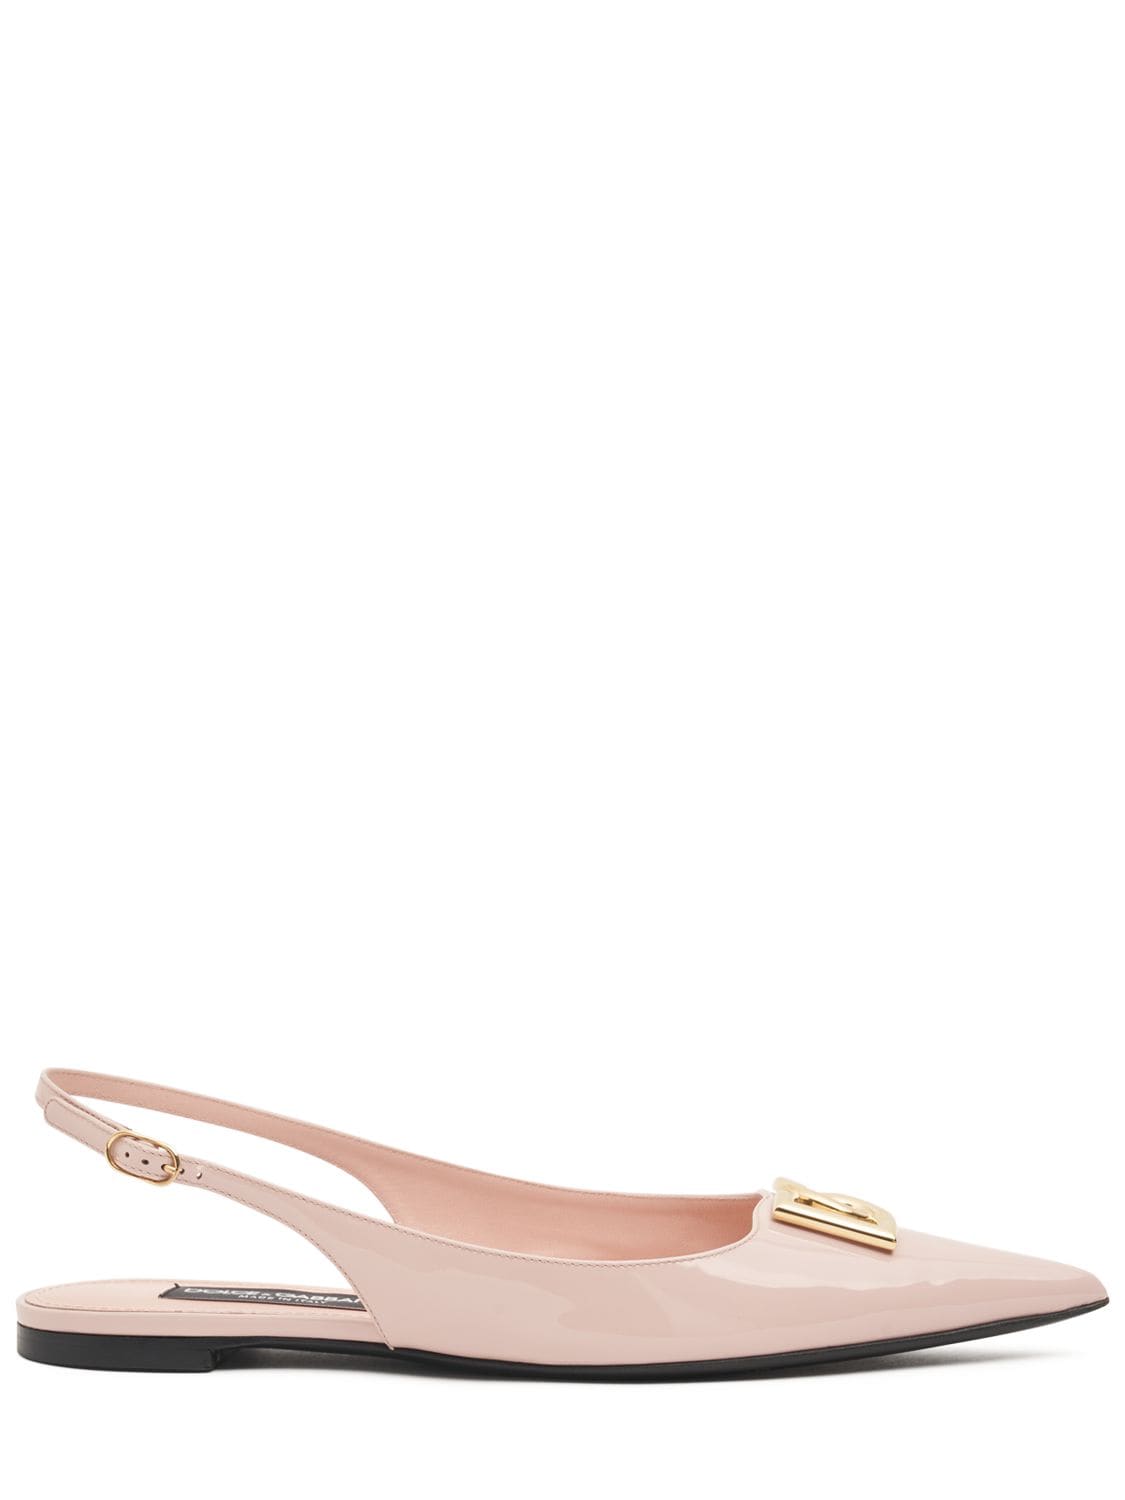 Dolce & Gabbana Leather Slingback Flats In Light Pink